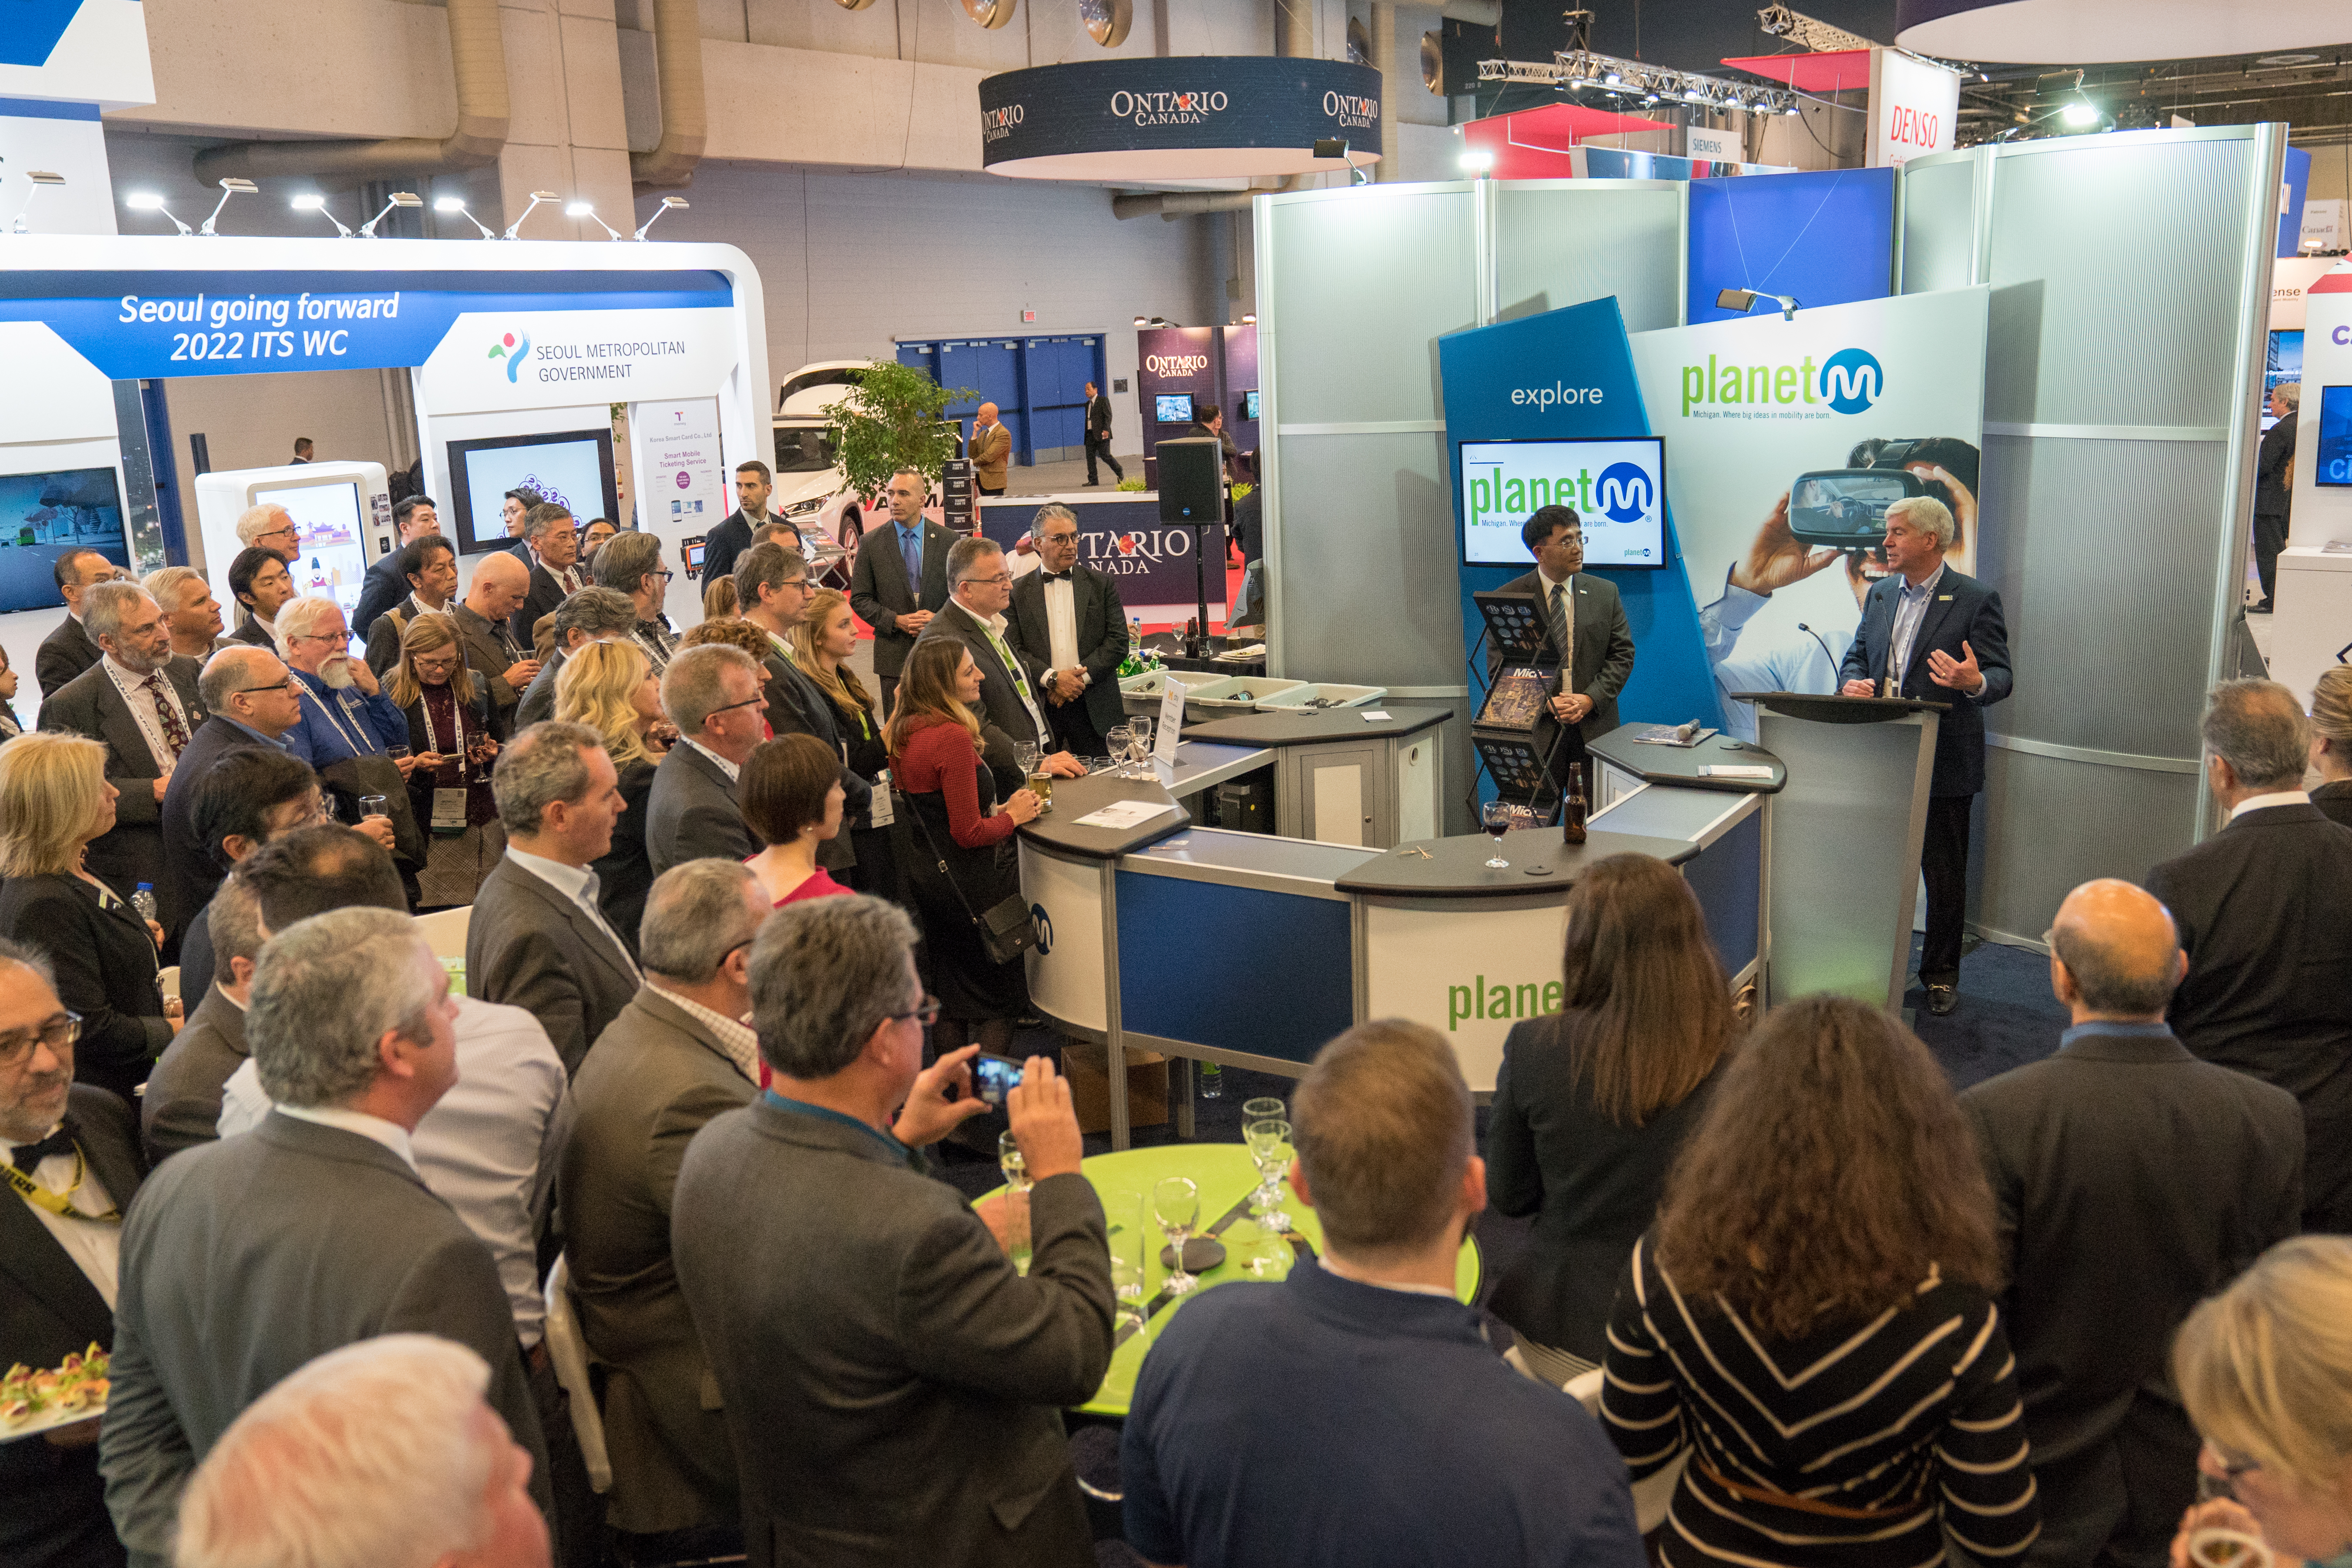 Michigan Gov. Rick Snyder addresses the crowd during a reception hosted by Mcity in the Planet M booth at the ITS World Congress in Montreal on Oct. 31, 2017. The reception celebrated the second phase of industry funding in Mcity, with 11 companies investing a total of $11 million.